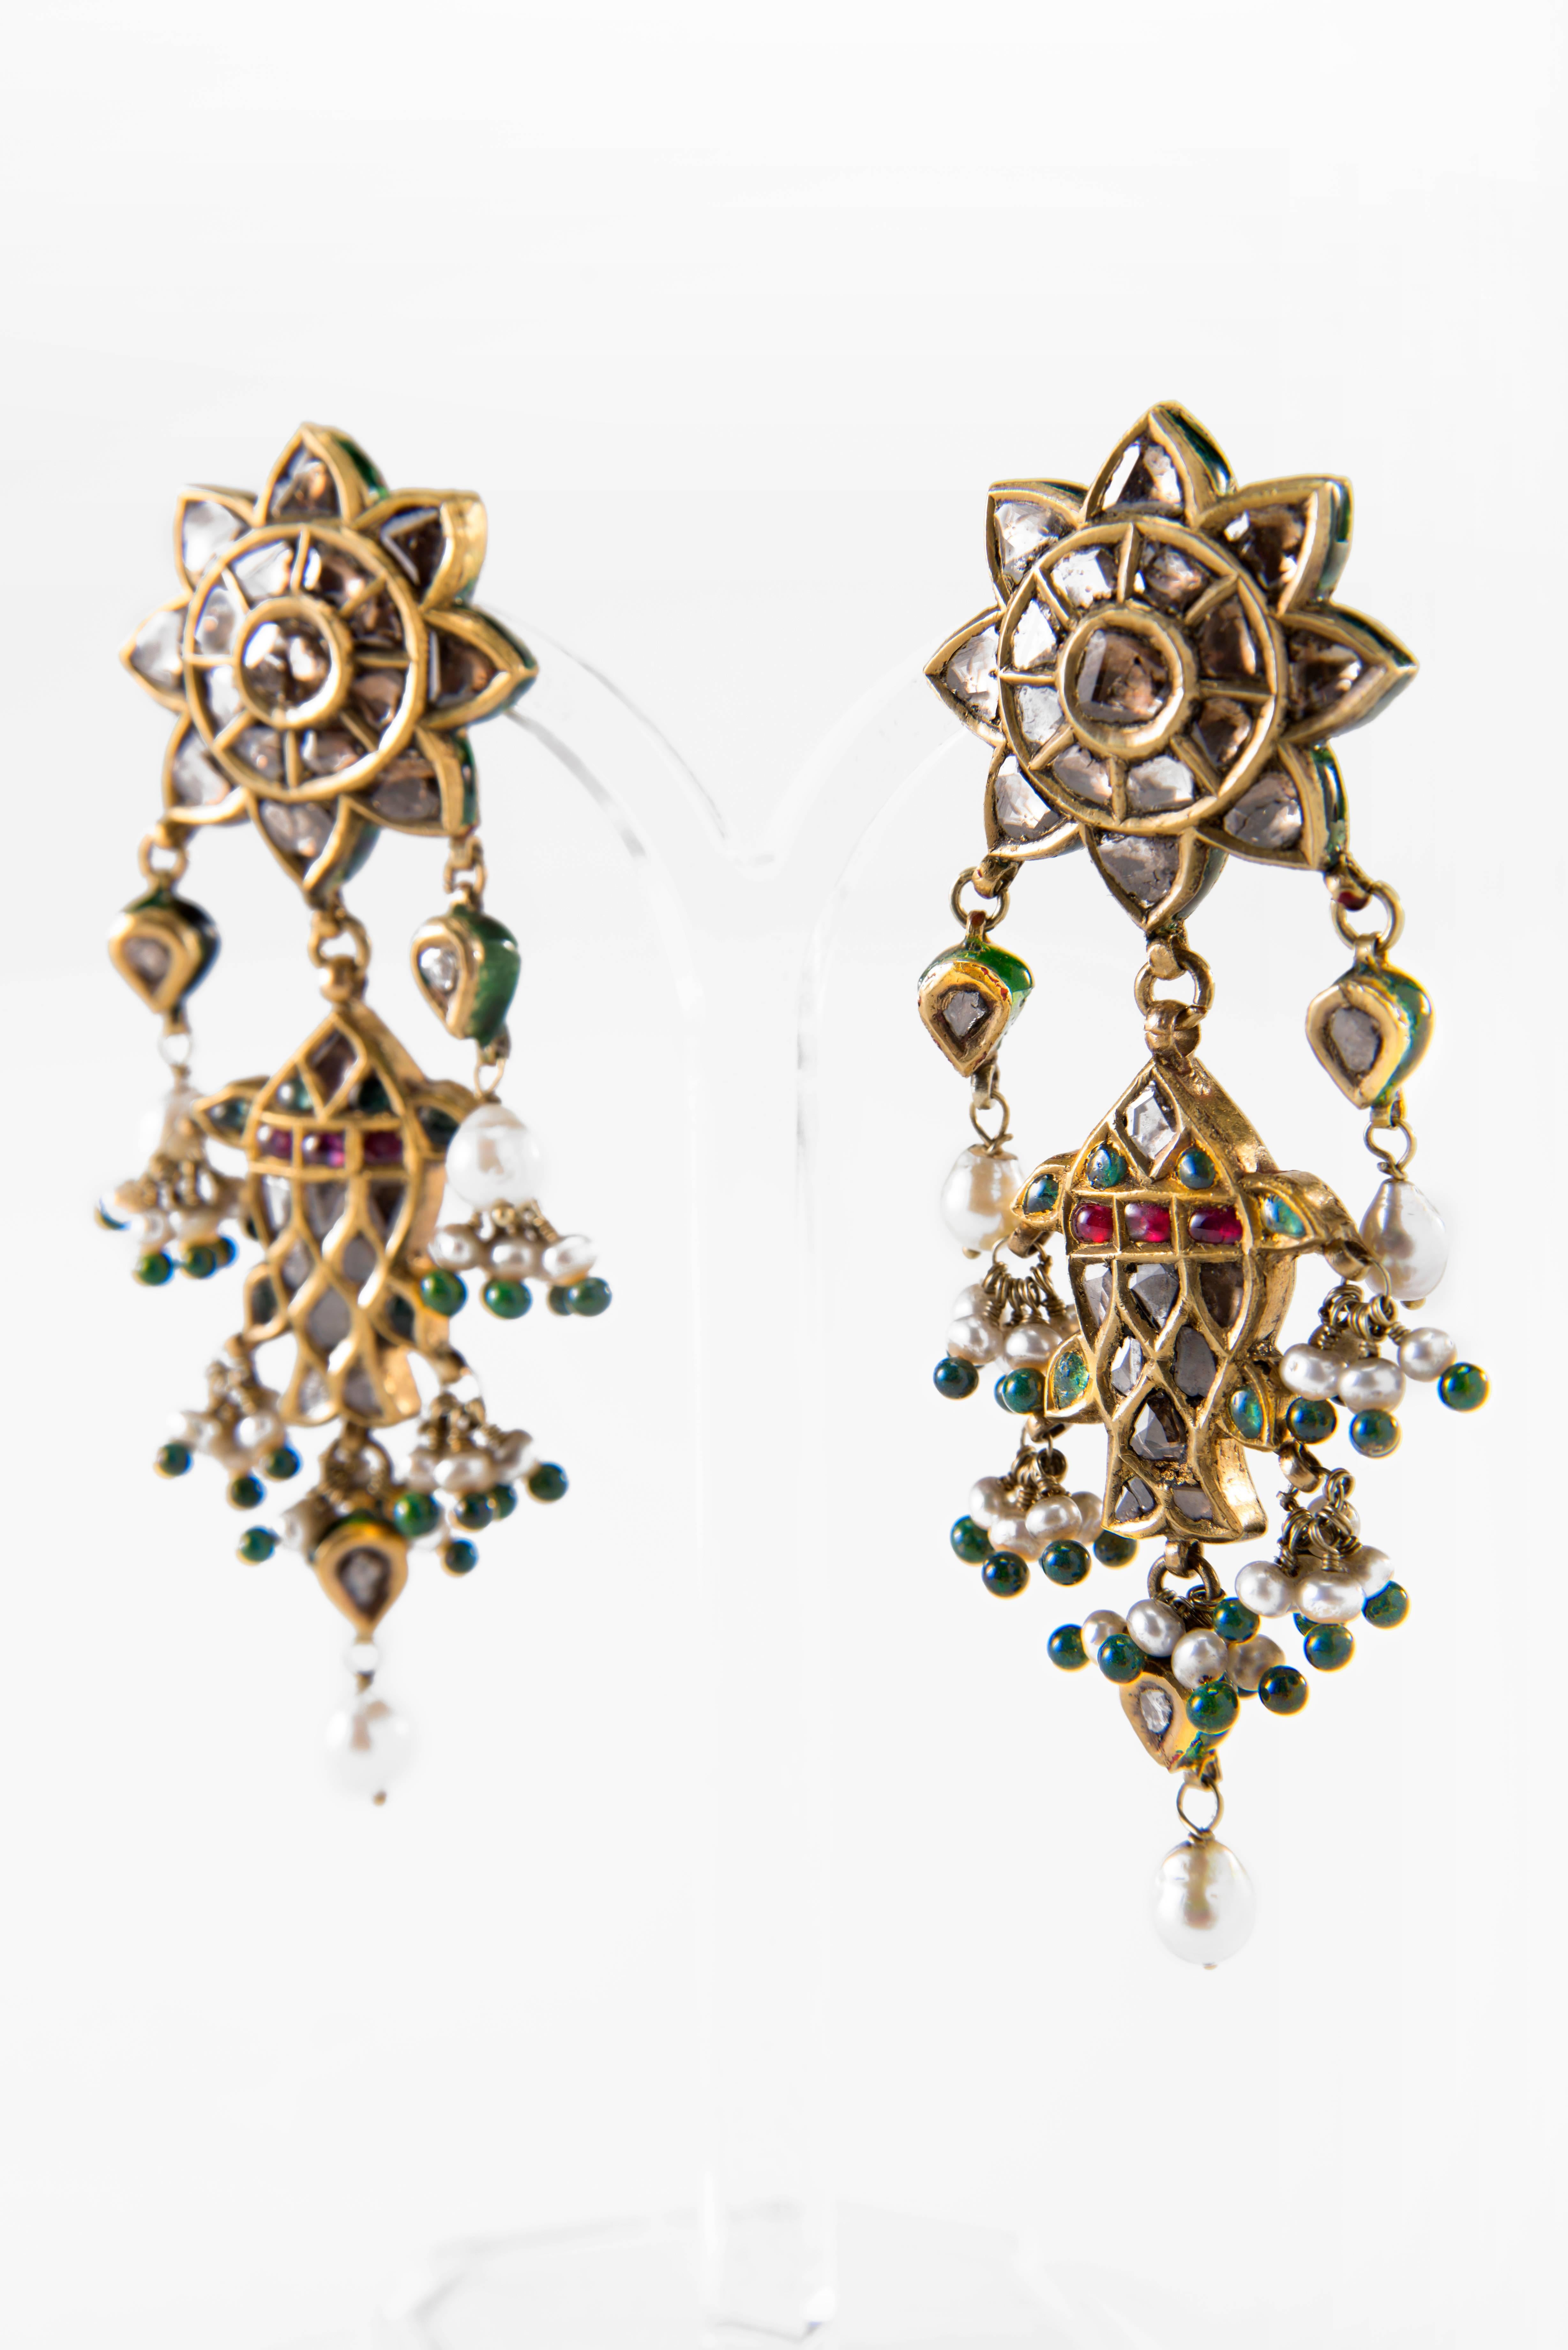 A pair of 20ct gold double ear pendants, jhale, set with colored stones on red and green foil and flat cut diamonds. The top is a flower shape rosette and suspended a fish, machhli, with stones set on both sides. The reverse of the flower top is